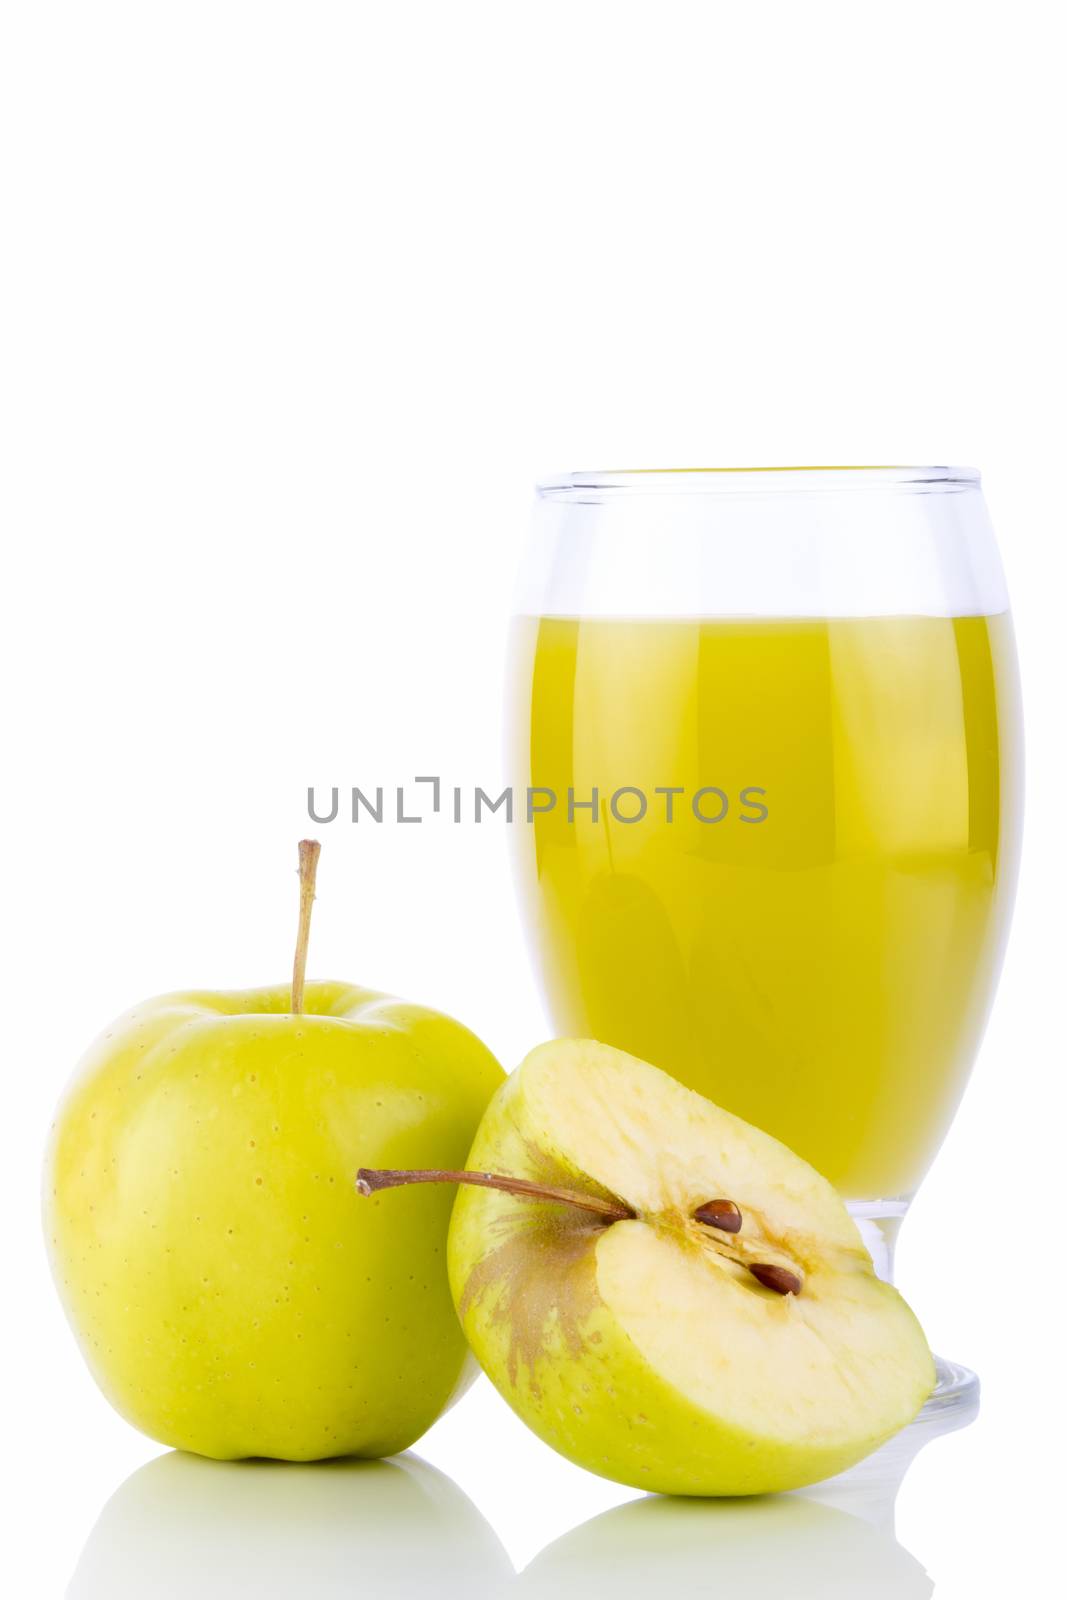 Apple juice in glass and green apples by manaemedia